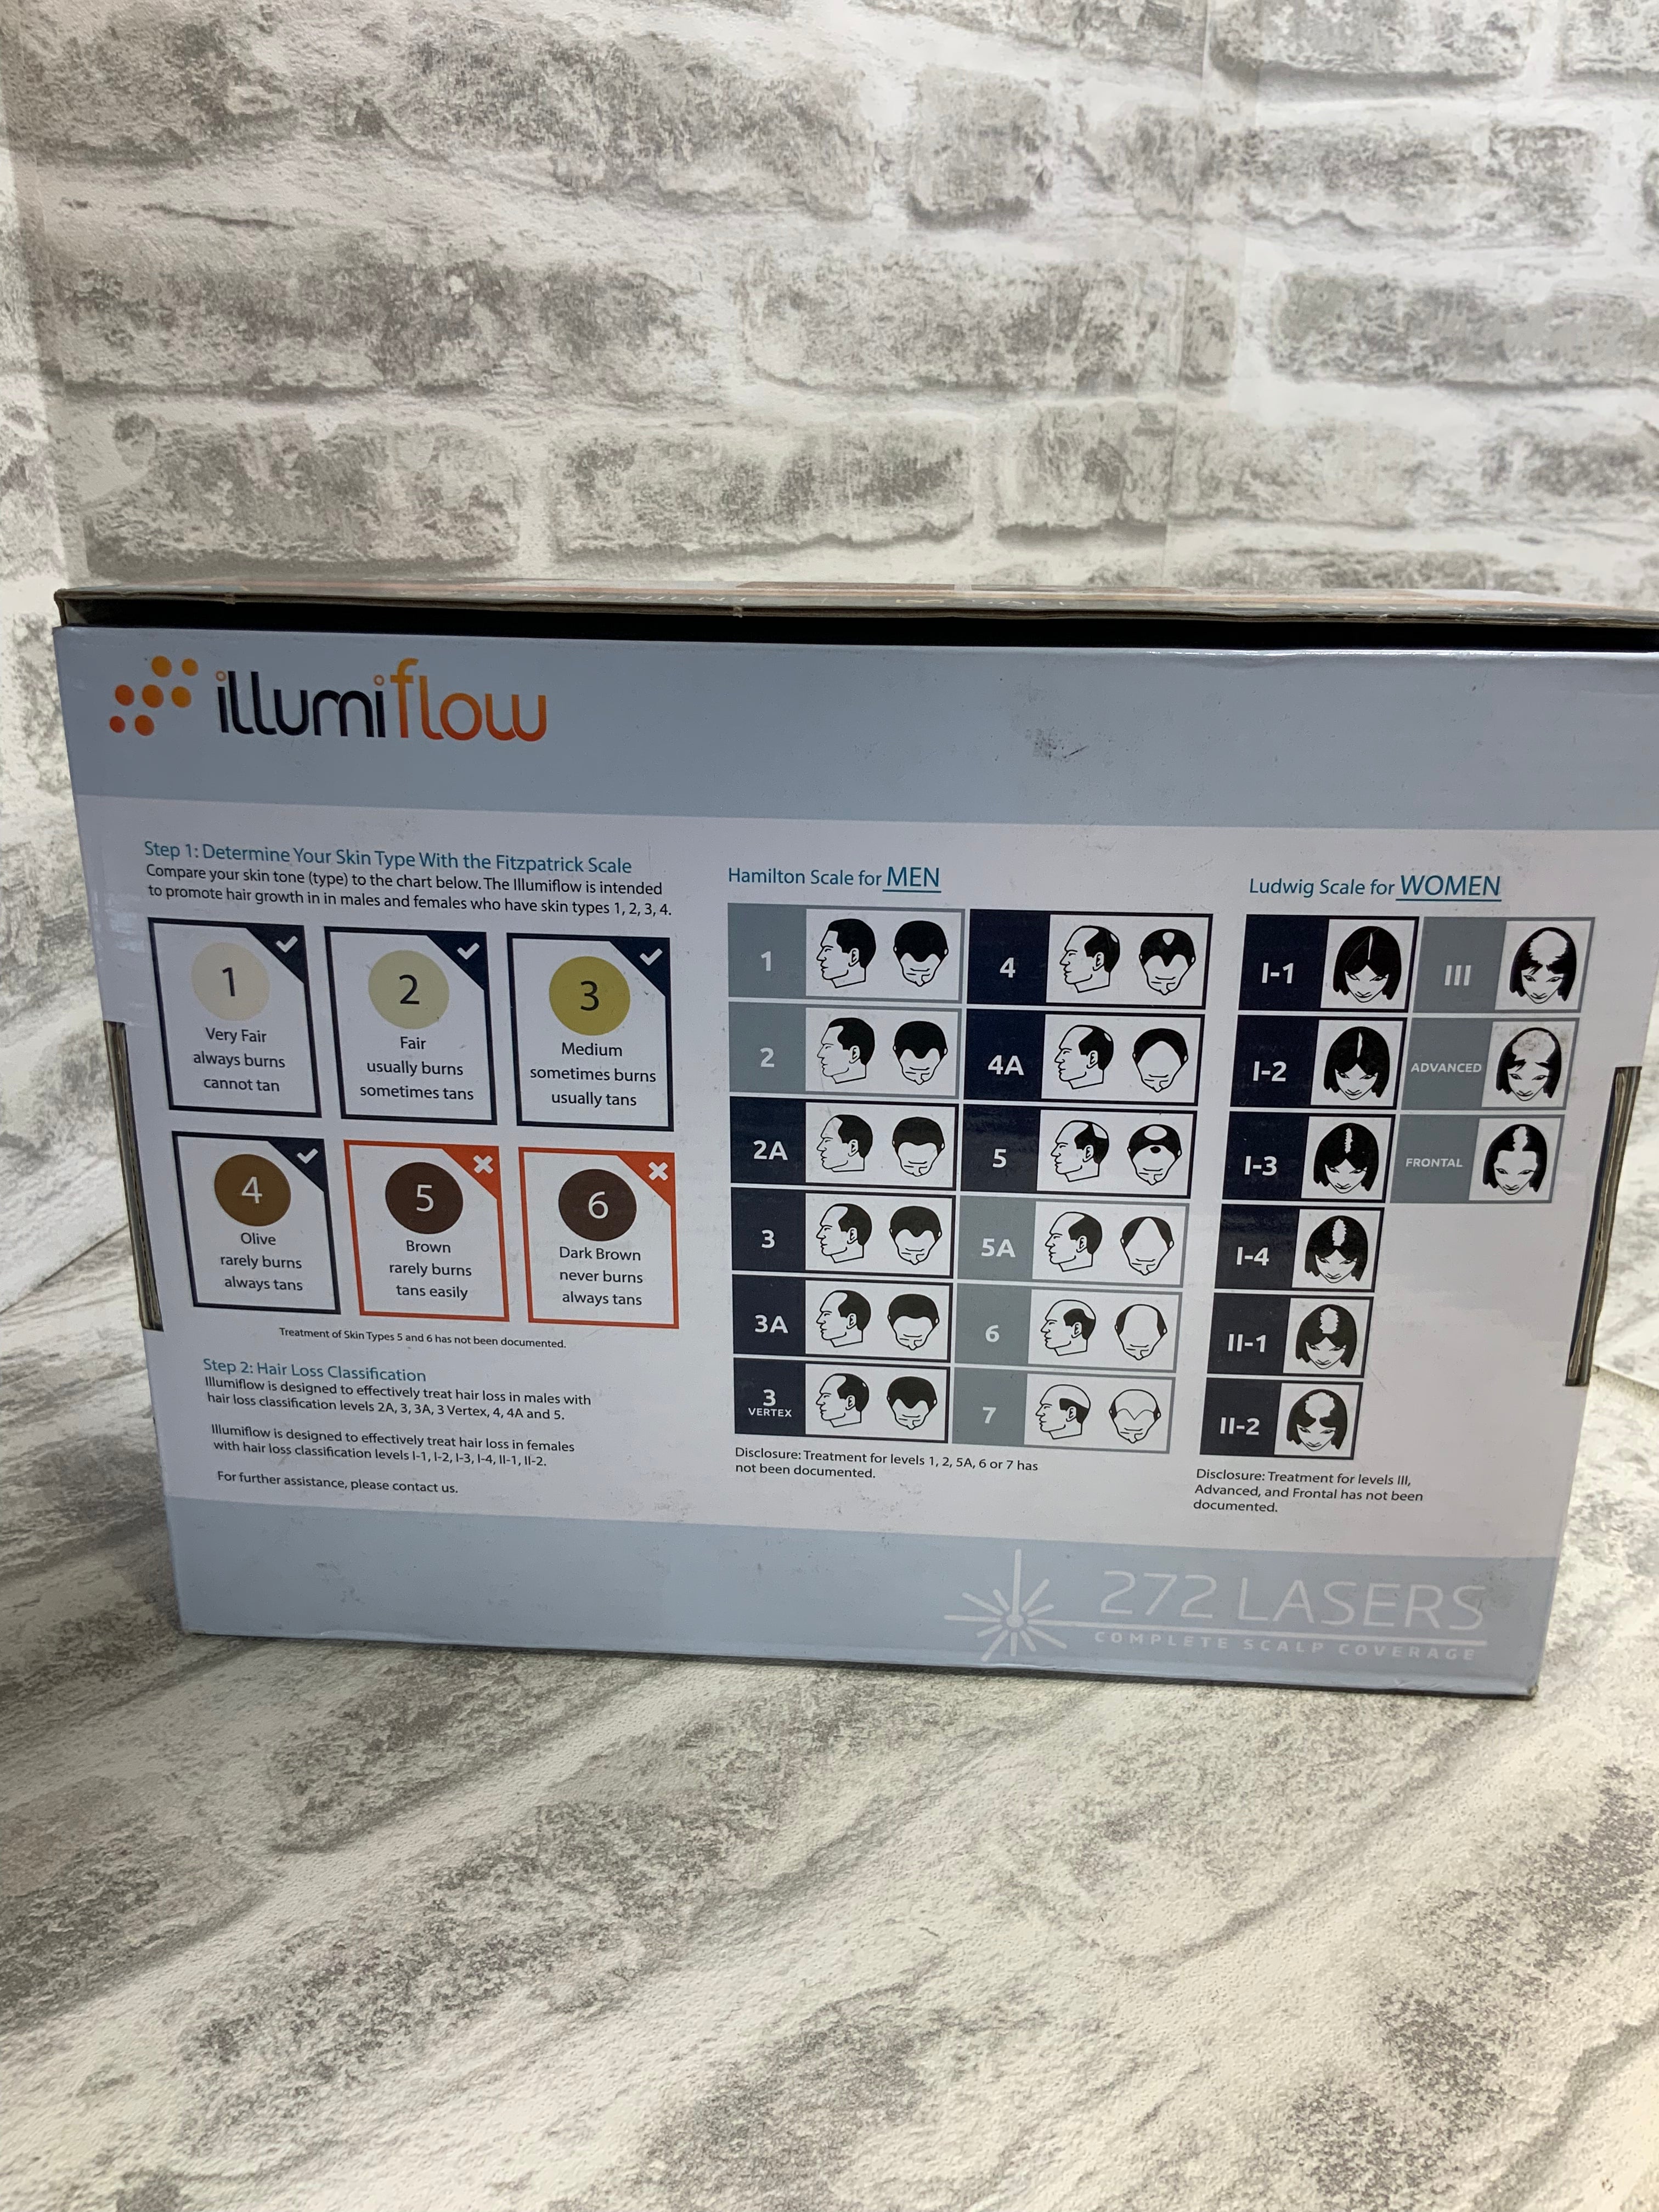 illumiflow 272 Laser Cap for Hair Growth - Low Level Laser Therapy **WORKS**